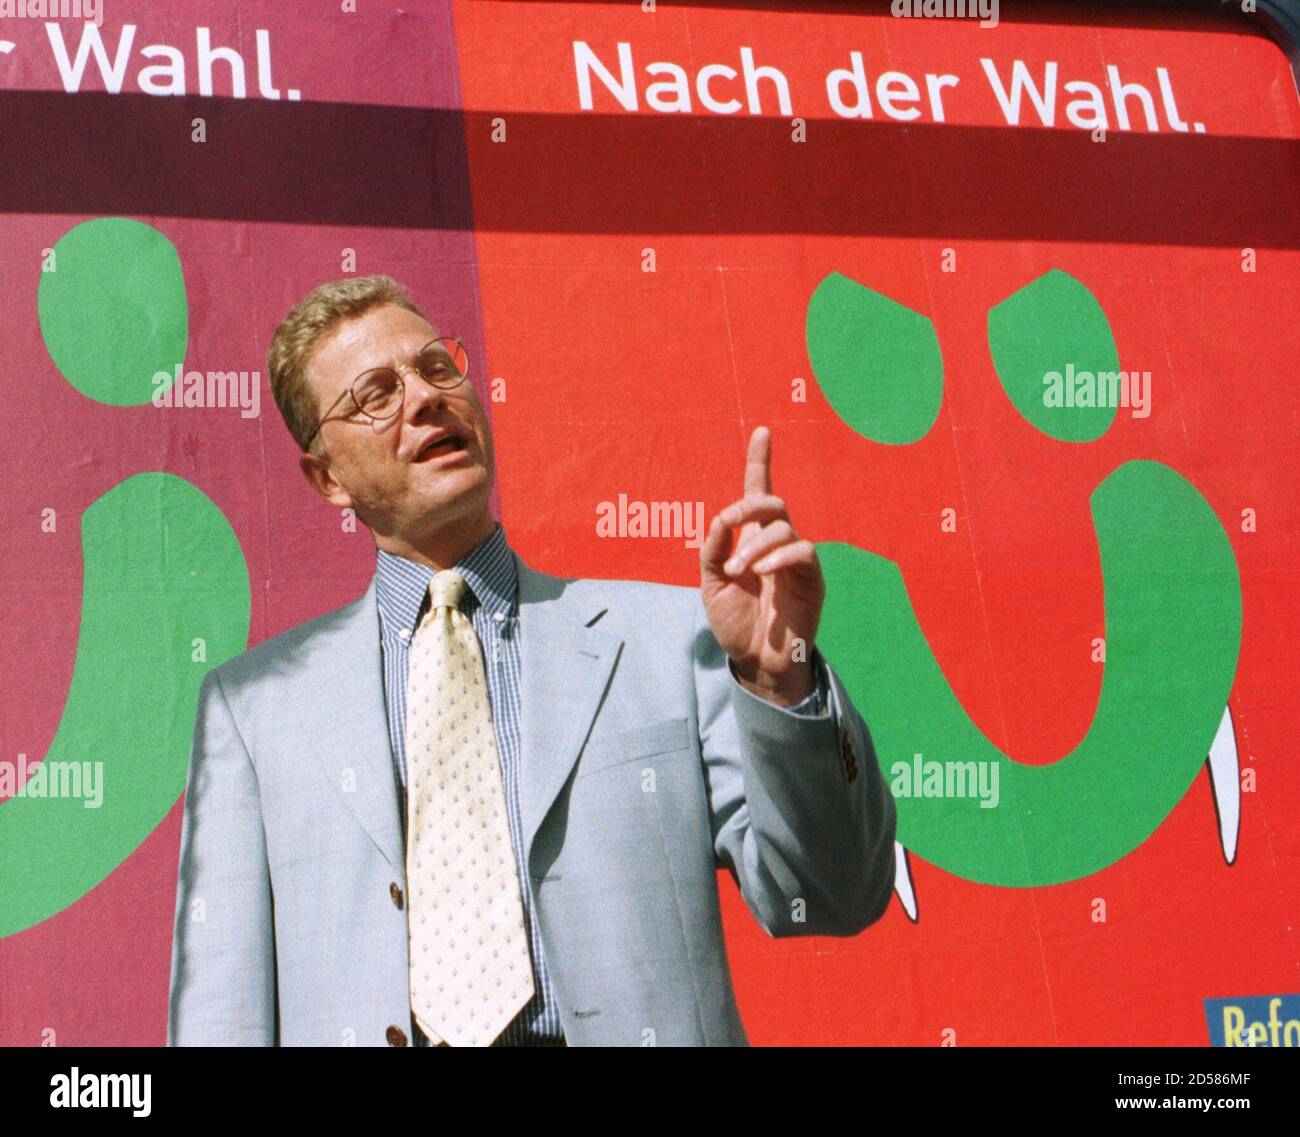 Guido Westerwelle, secretary general of the Free Liberal party FDP points at a new election campaign placard in Bonn June 8. The FDP' s new placard is a caricature of a campaign poster of the Greens party showing a smiling face with Dracula's teeth and reads 'after the elections' ('nach der Wahl'). Germany will elect a new Chancellor in the September 27 general elections. Stock Photo